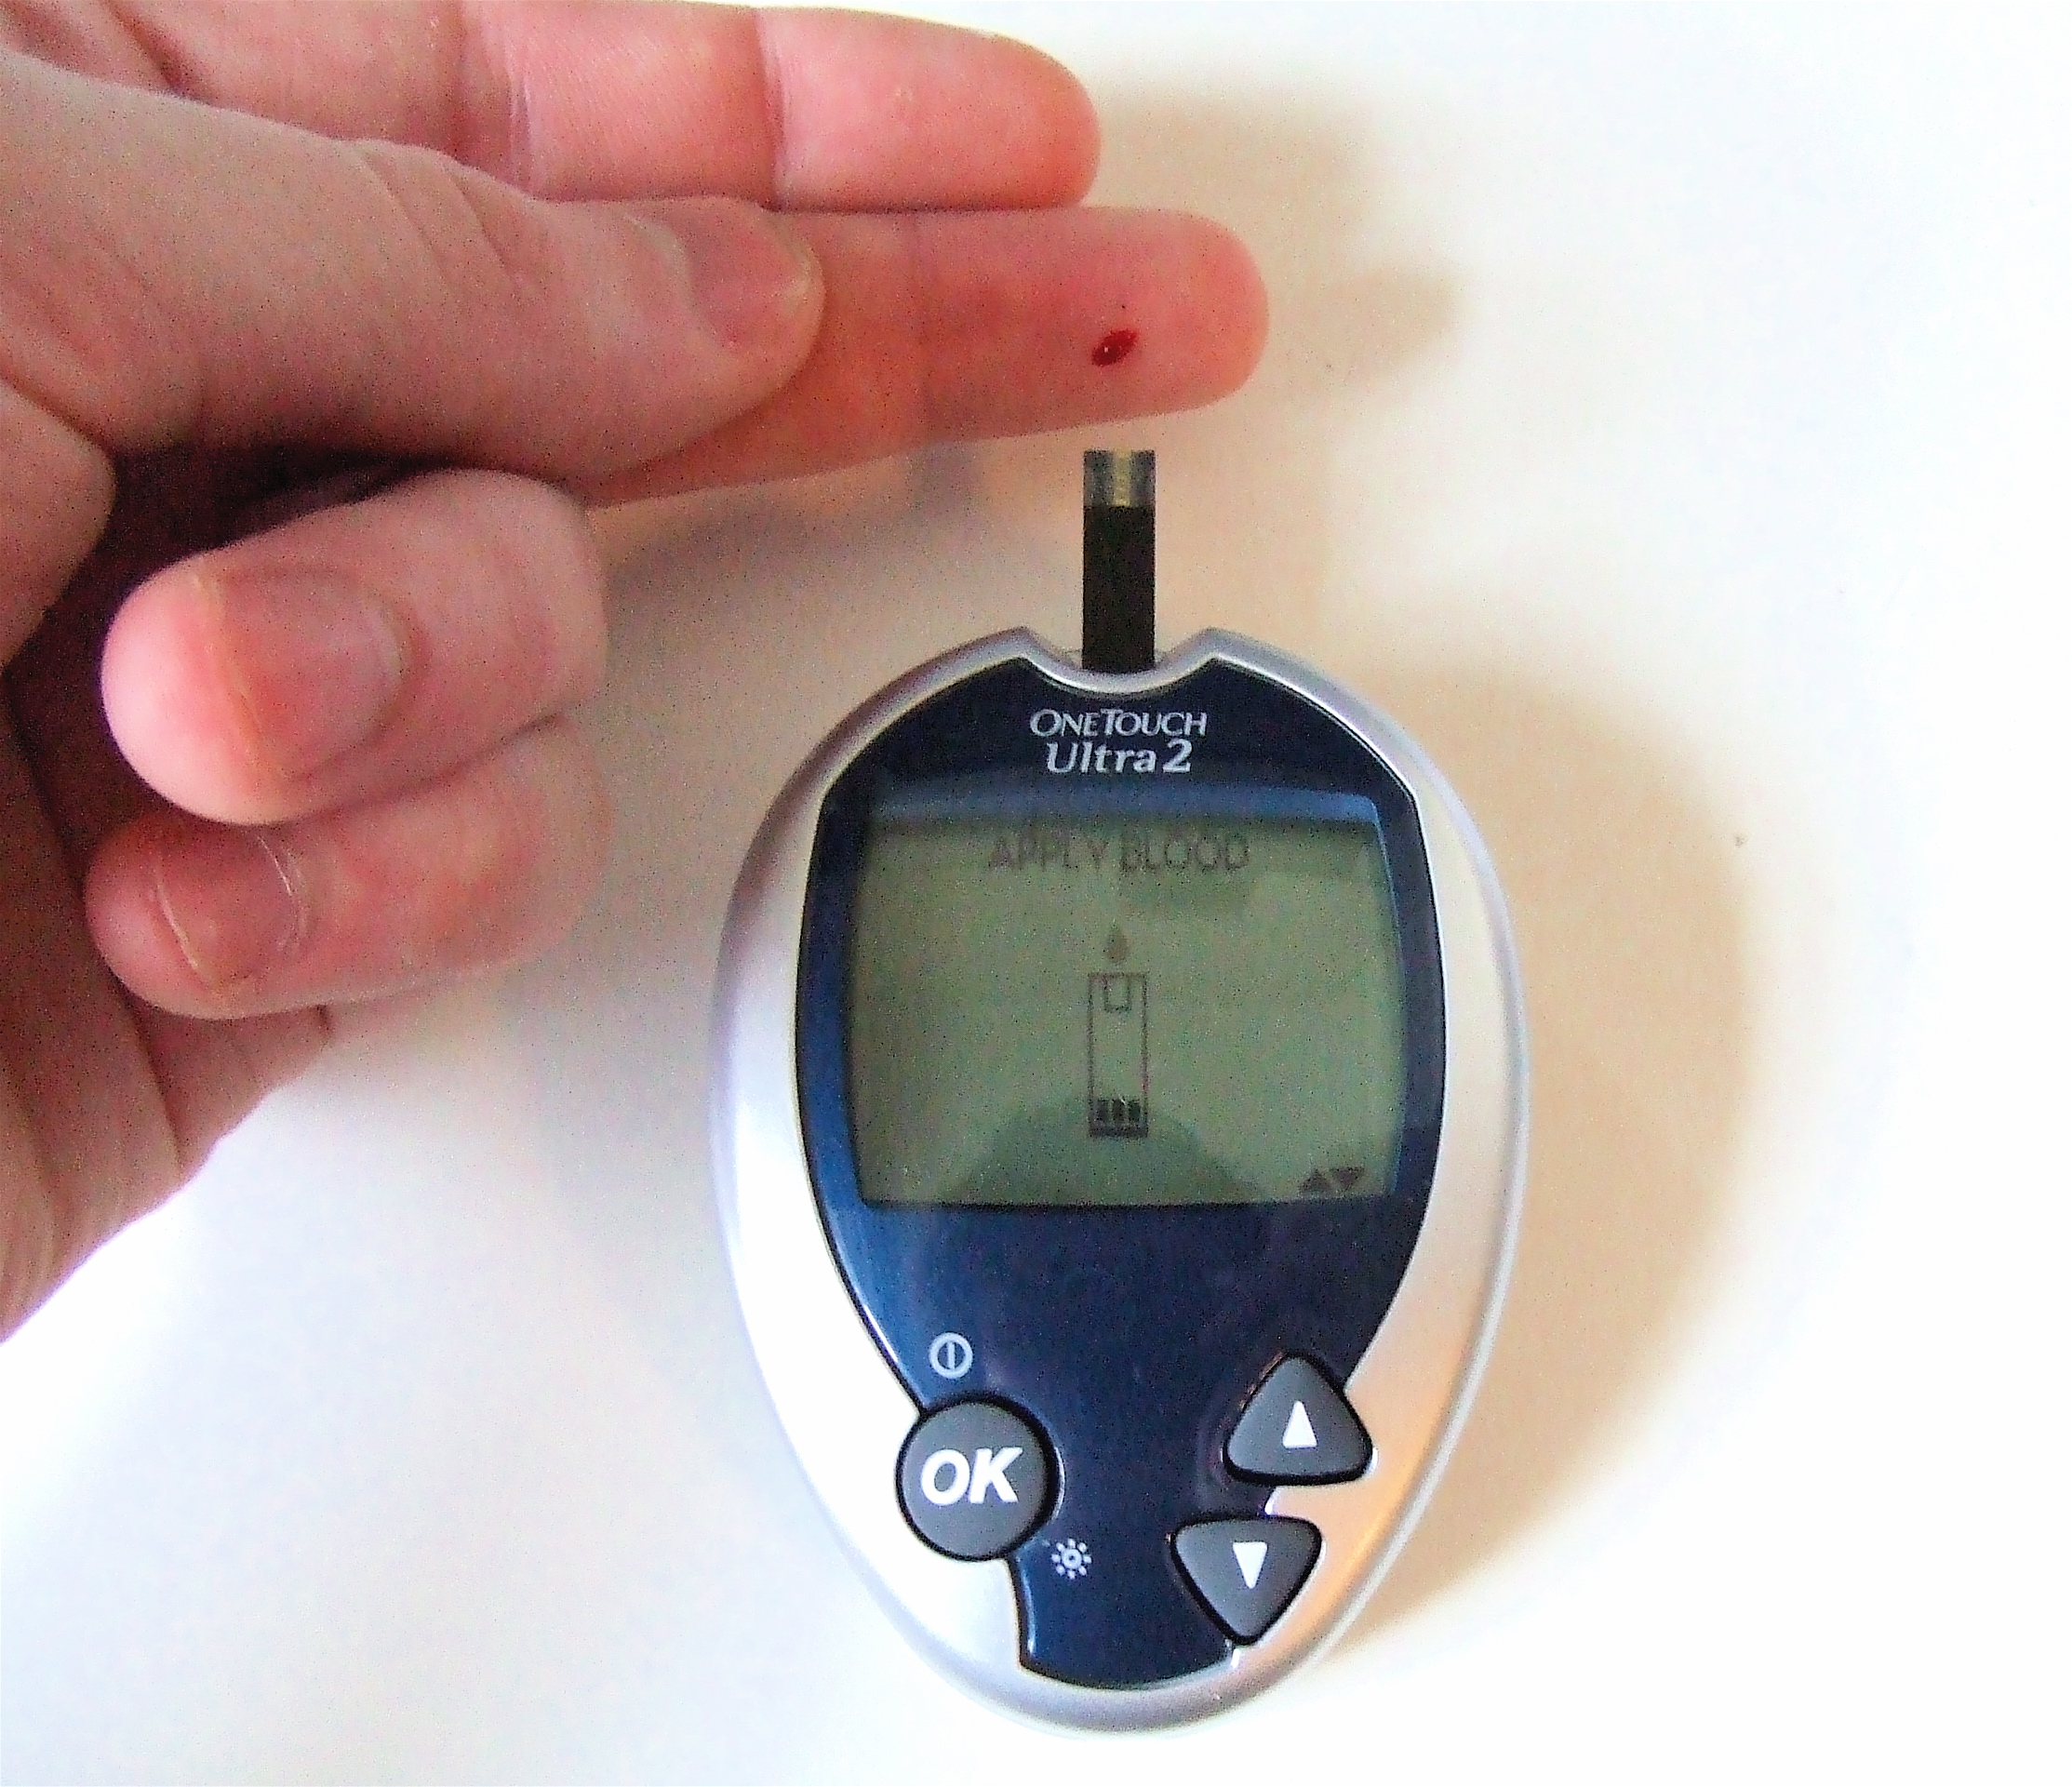 How To Control Type 2 Diabetes Without Medication